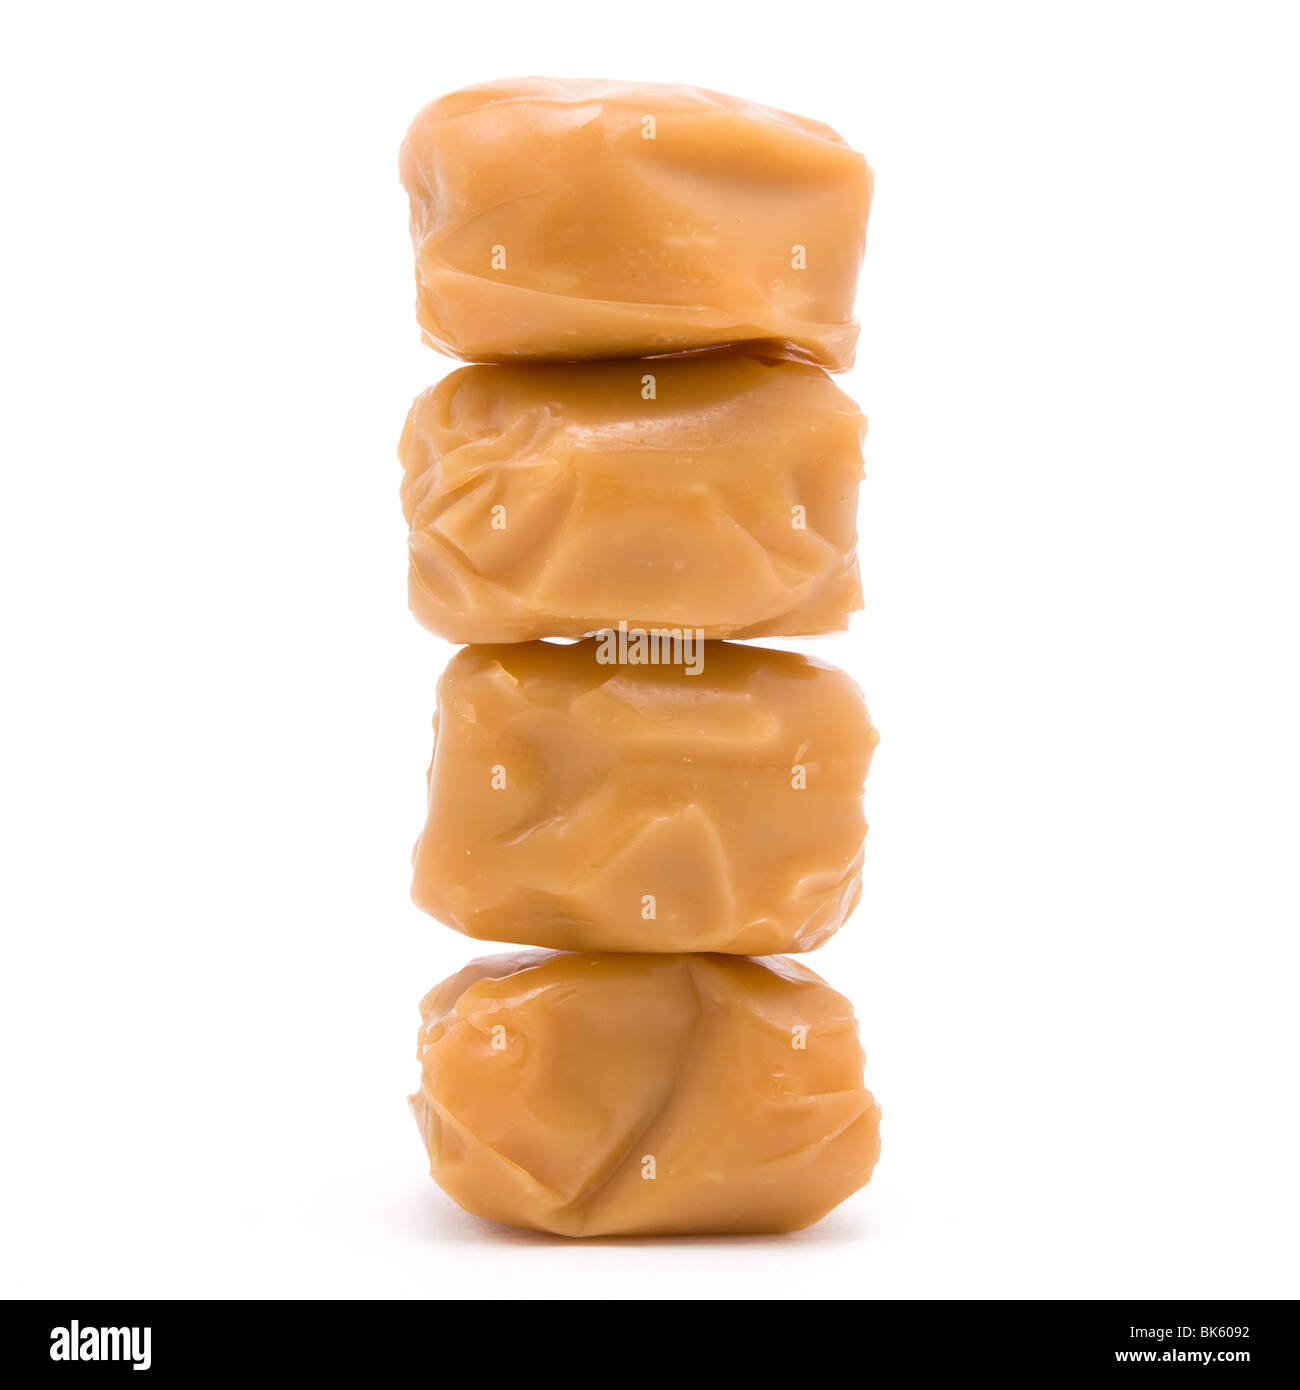 Chocolate filled Caramel toffee isolated against white background. Stock Photo